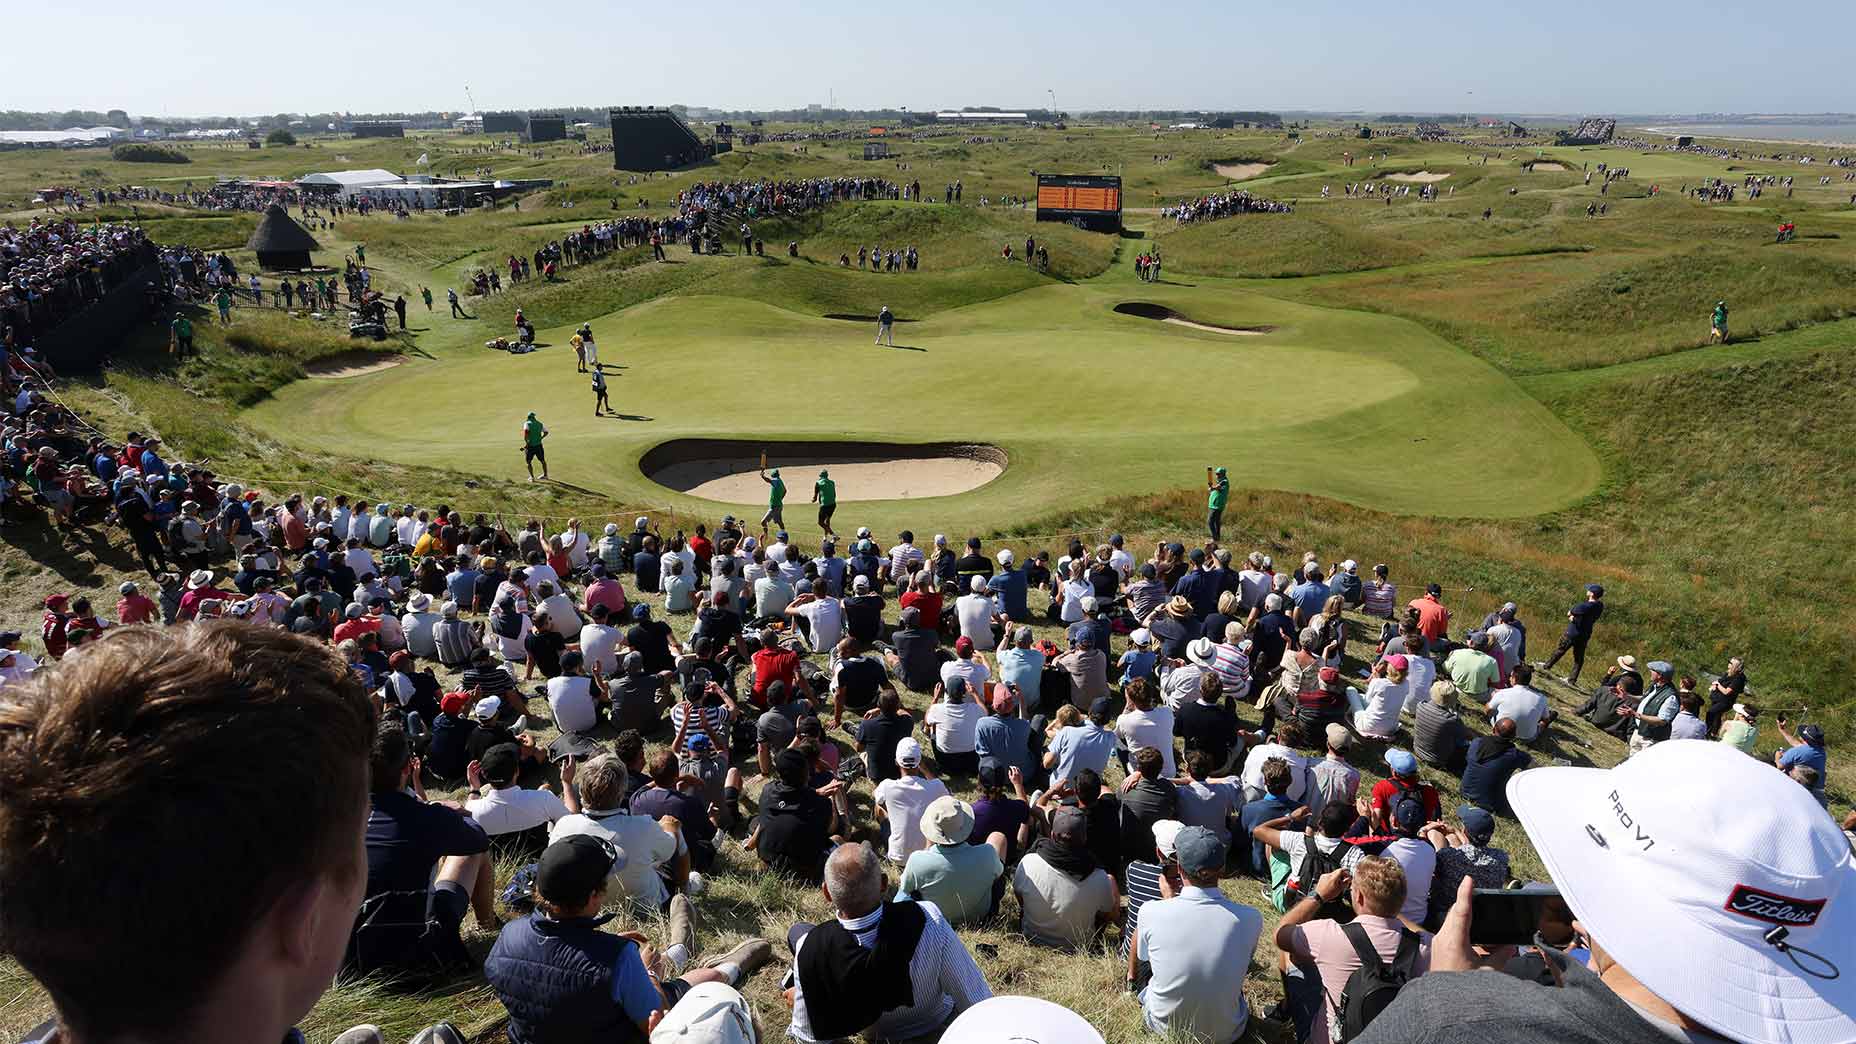 How to book a tee time at Royal St. George's, 2021 British Open host